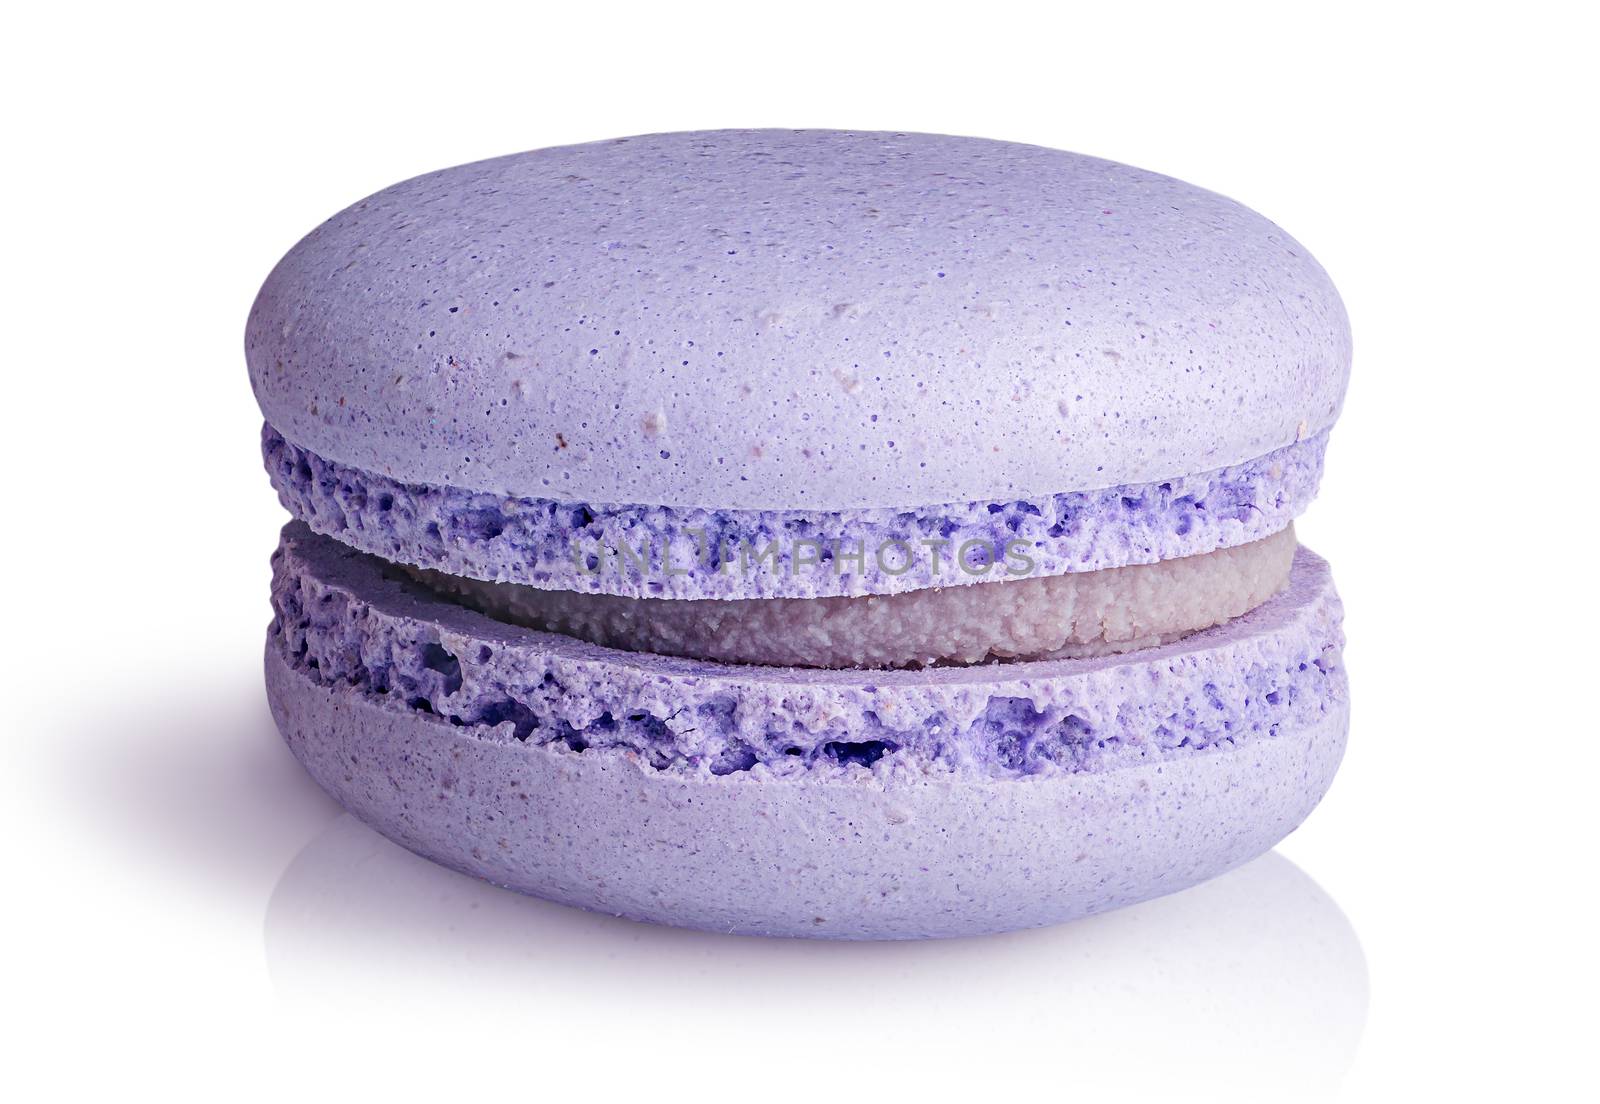 One purple macaroon front view by Cipariss